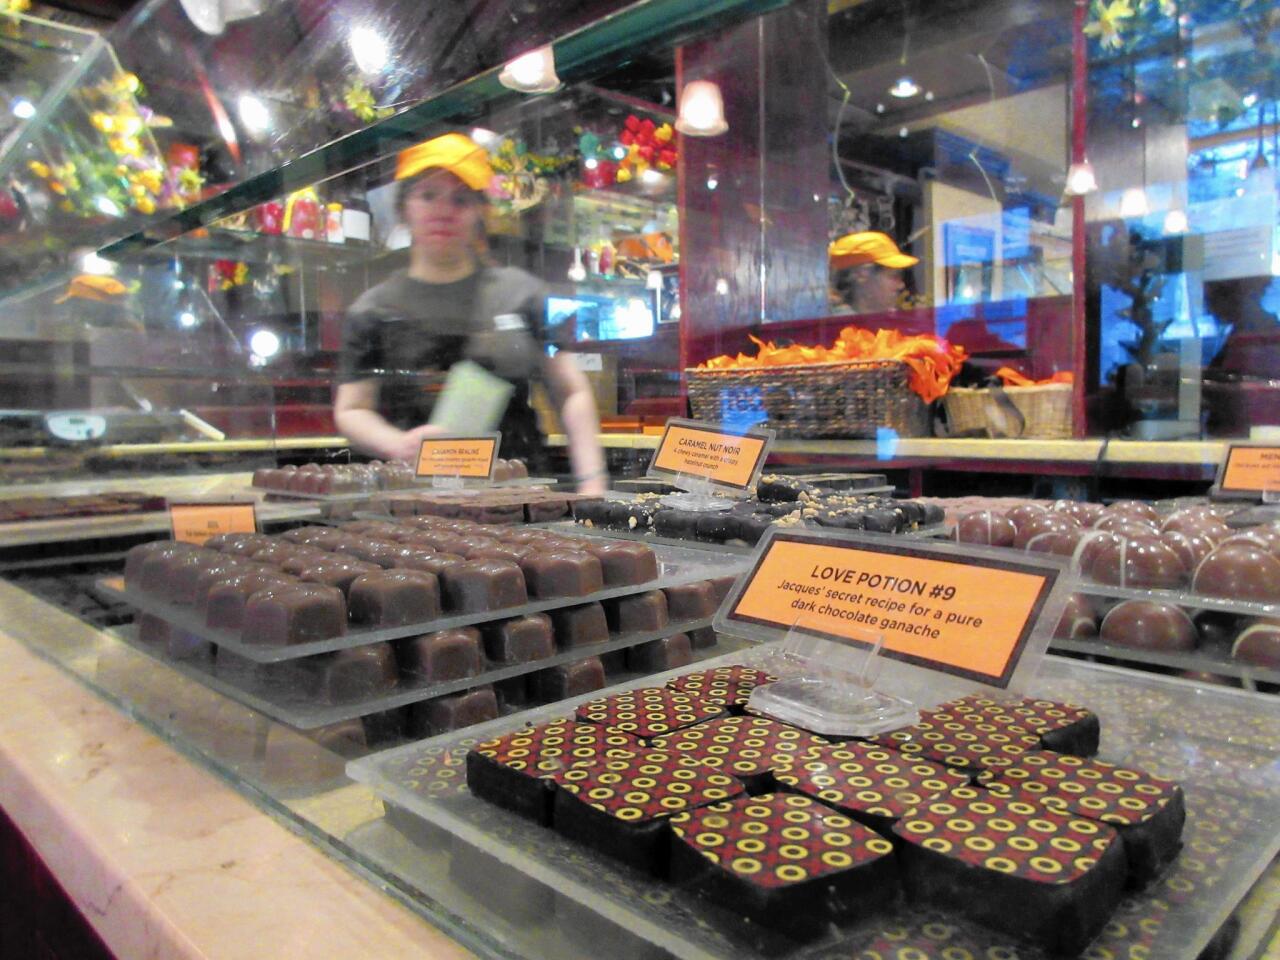 A display of chocolates at Jacques Torres, a chocolatier in the DUMBO section of Brooklyn, N.Y. Jacques Torres is one of the stops on A Slice of Brooklyn’s chocolate tour. In addition to chocolate samples to taste, the tour offers a peek at the chocolate-making process and interesting neighborhoods, along with insight into how some of the businesses got started.